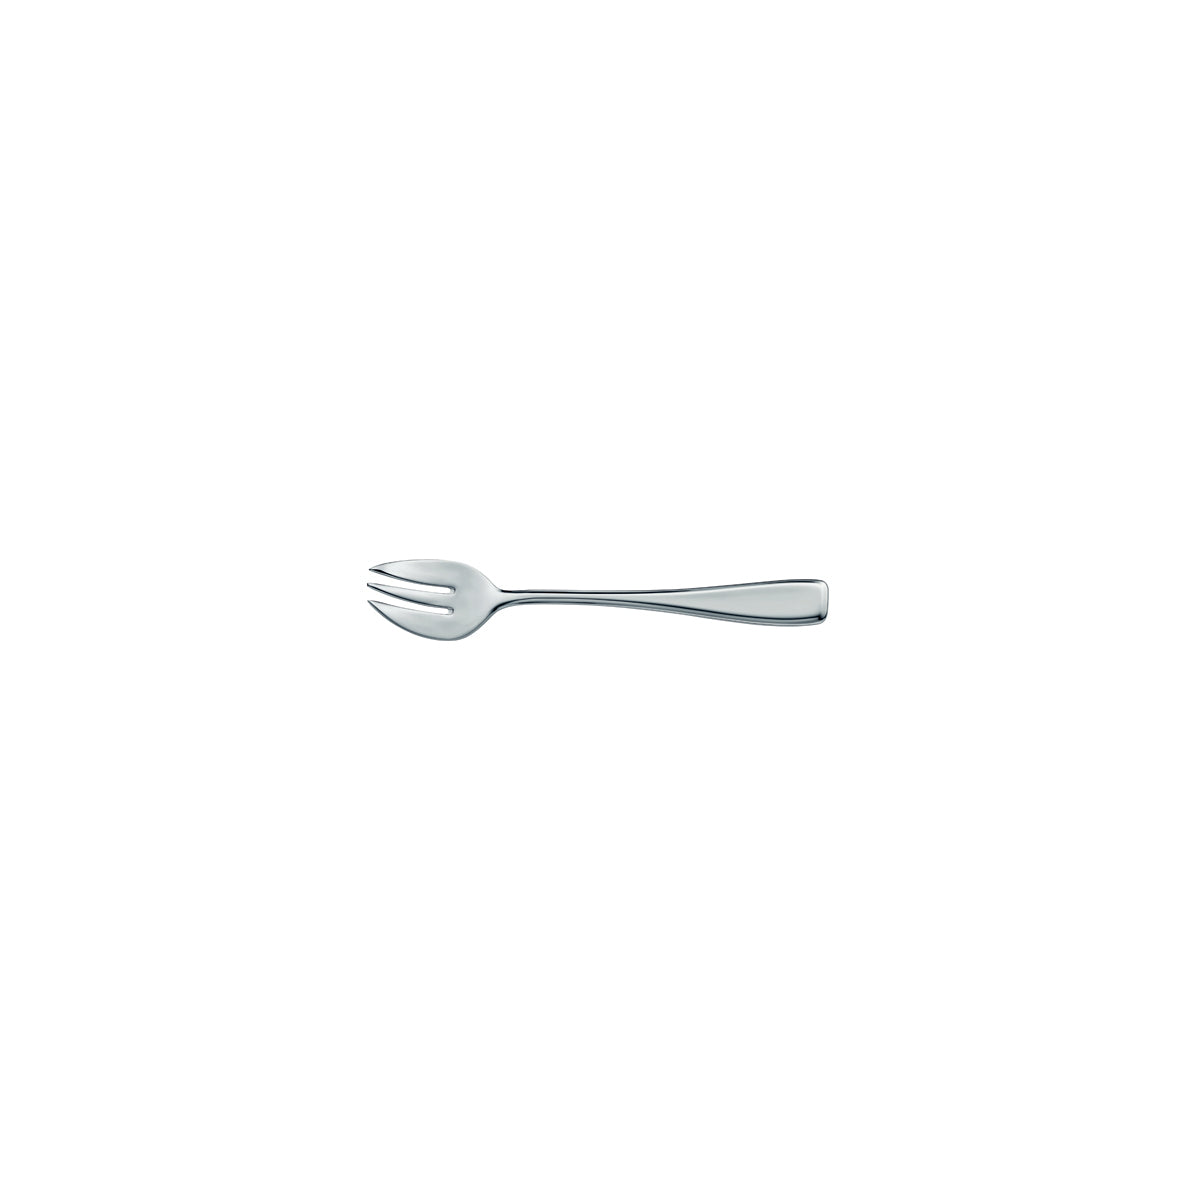 12.7940.6040 WMF Solid Oyster Fork Stainless Steel Tomkin Australia Hospitality Supplies